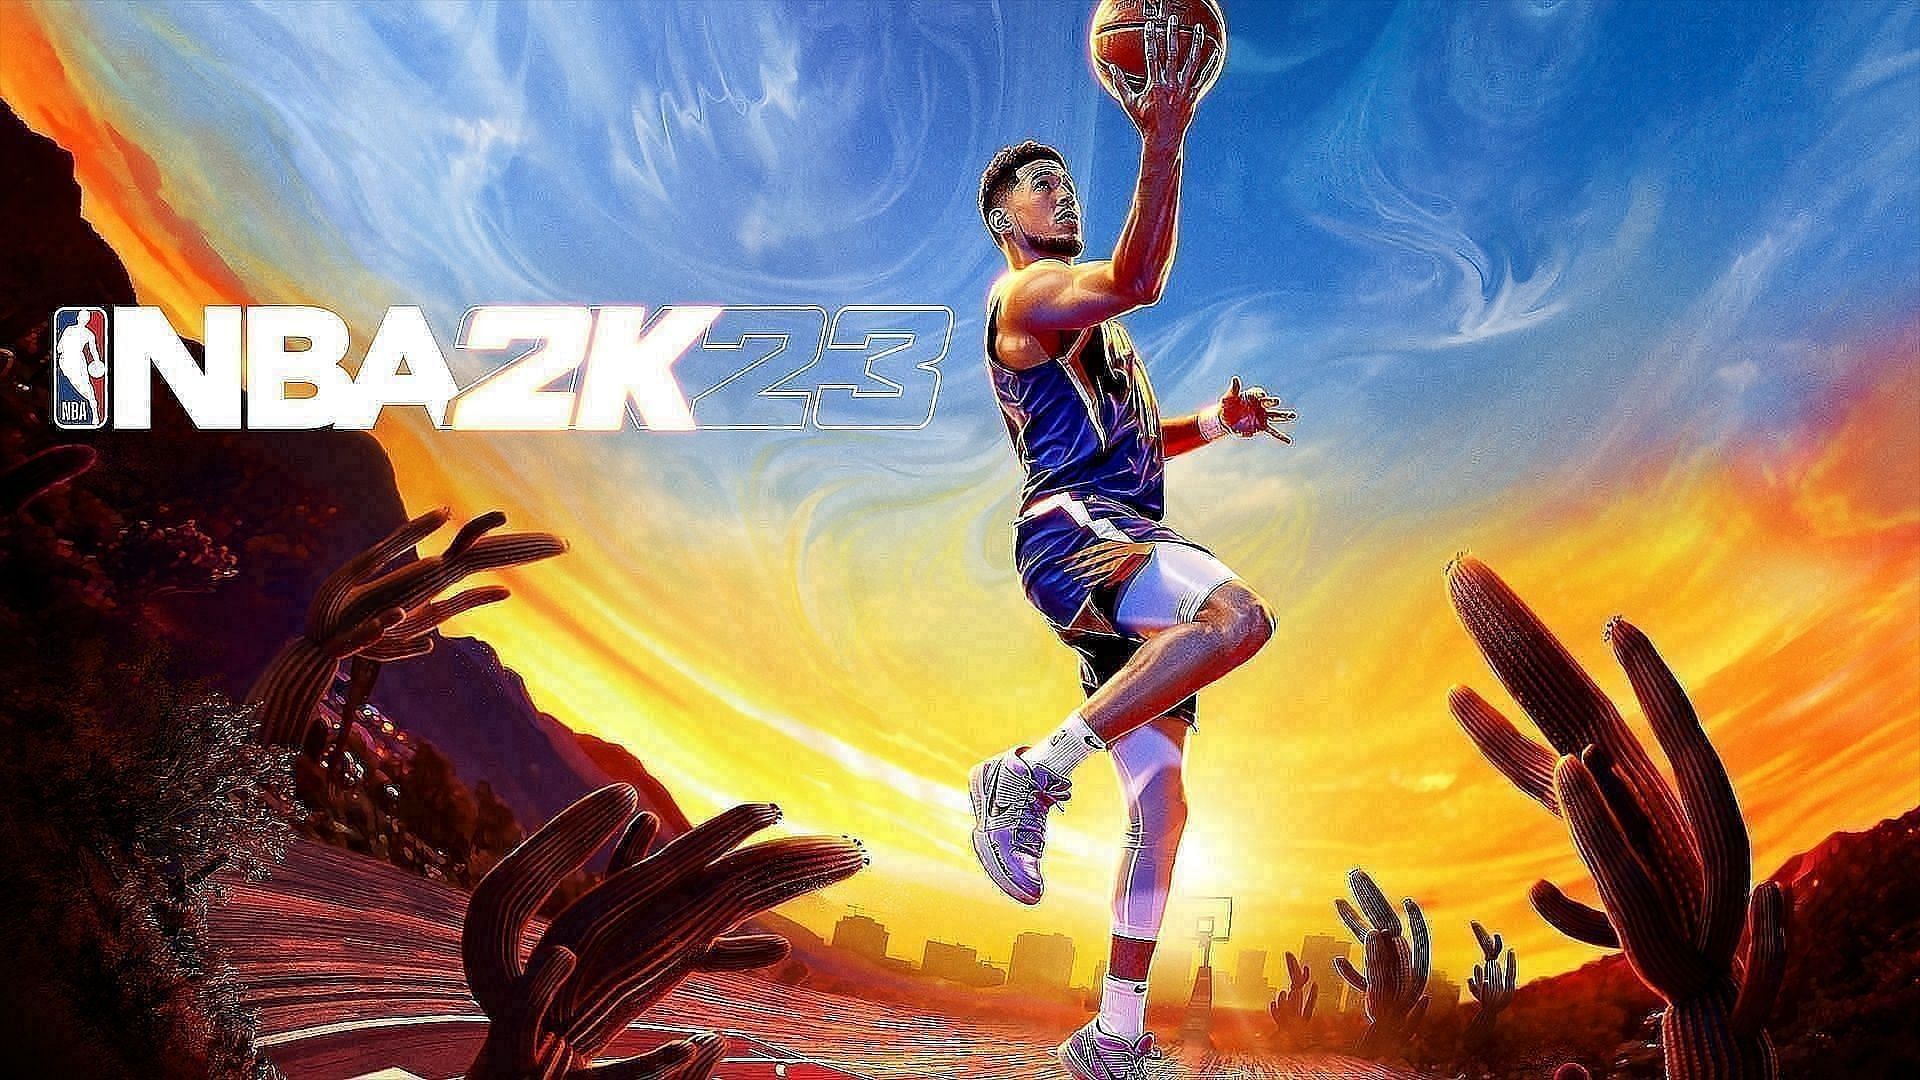 NBA 2K23 has a range of new features and challenges.